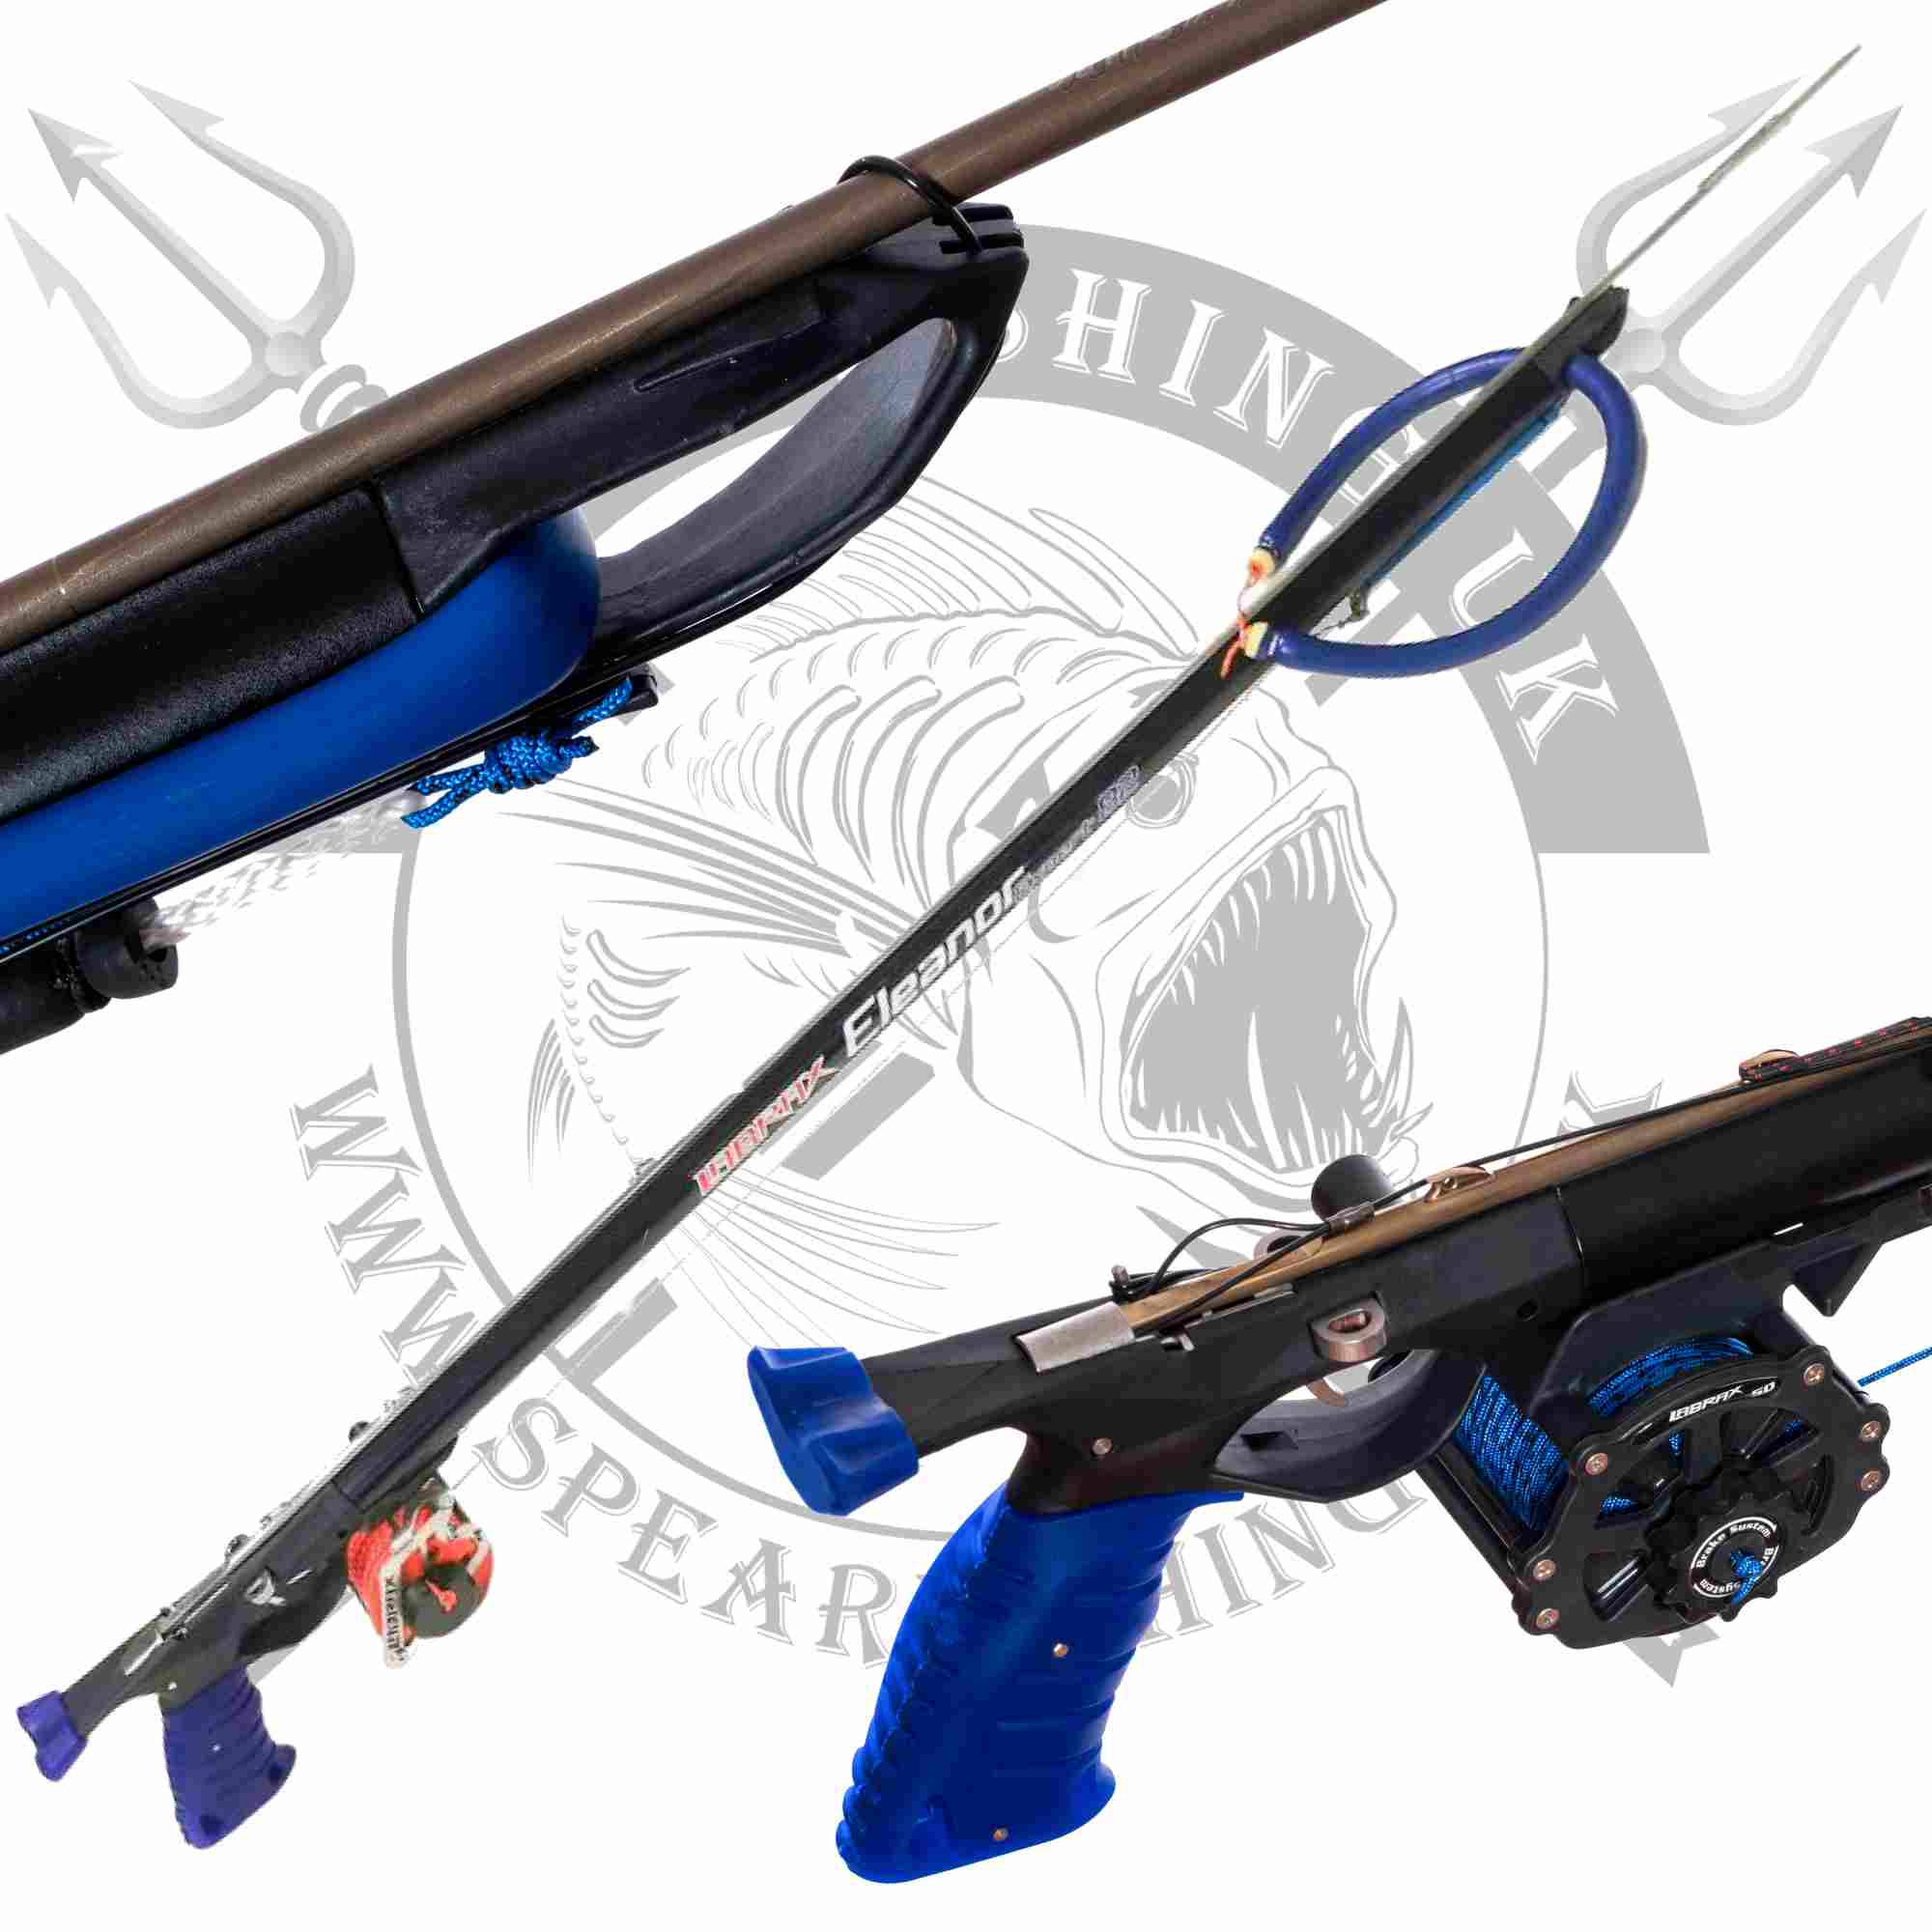 The Hunter Gatherer Spearfishing Package